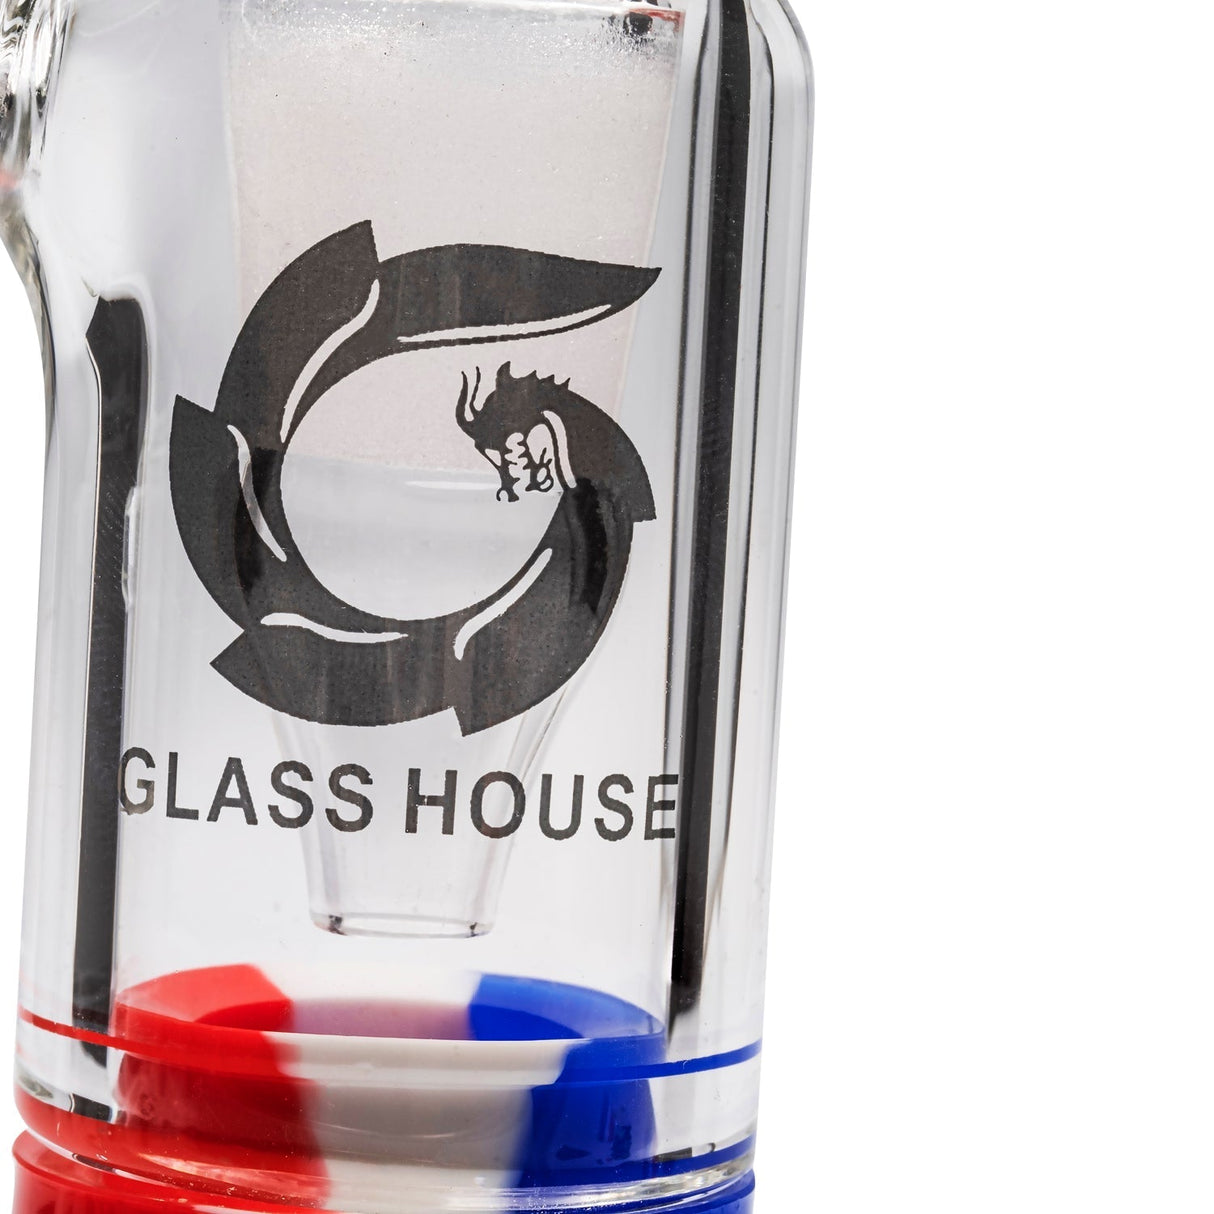 Glasshouse Quartz Reclaim Kit close-up with logo and 2 silicone dishes in red and blue